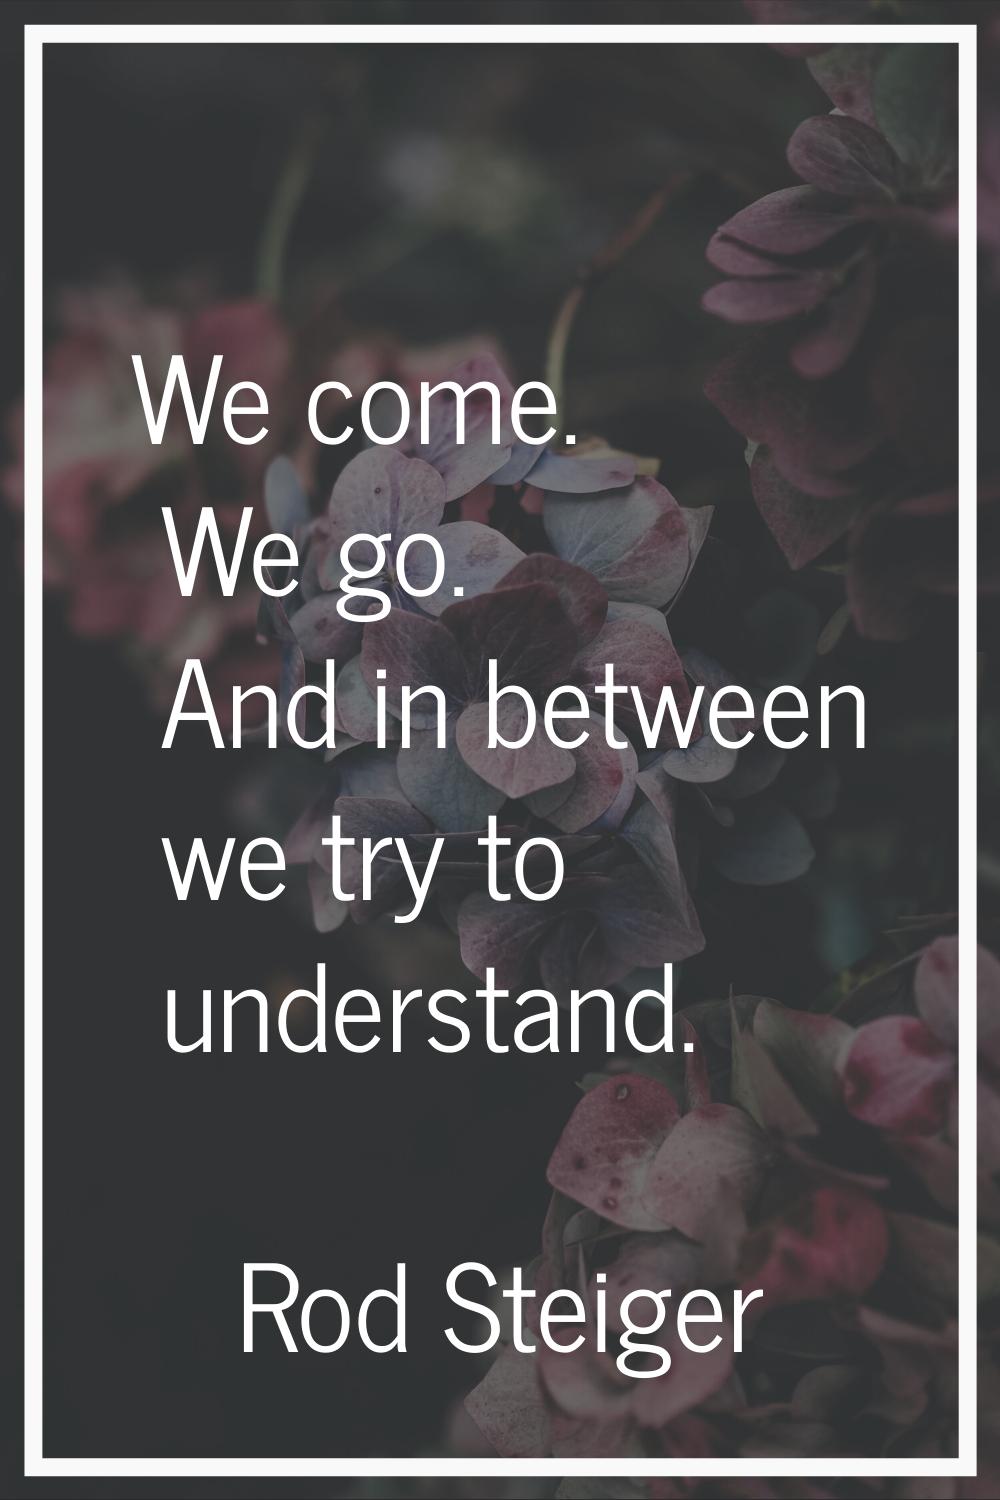 We come. We go. And in between we try to understand.